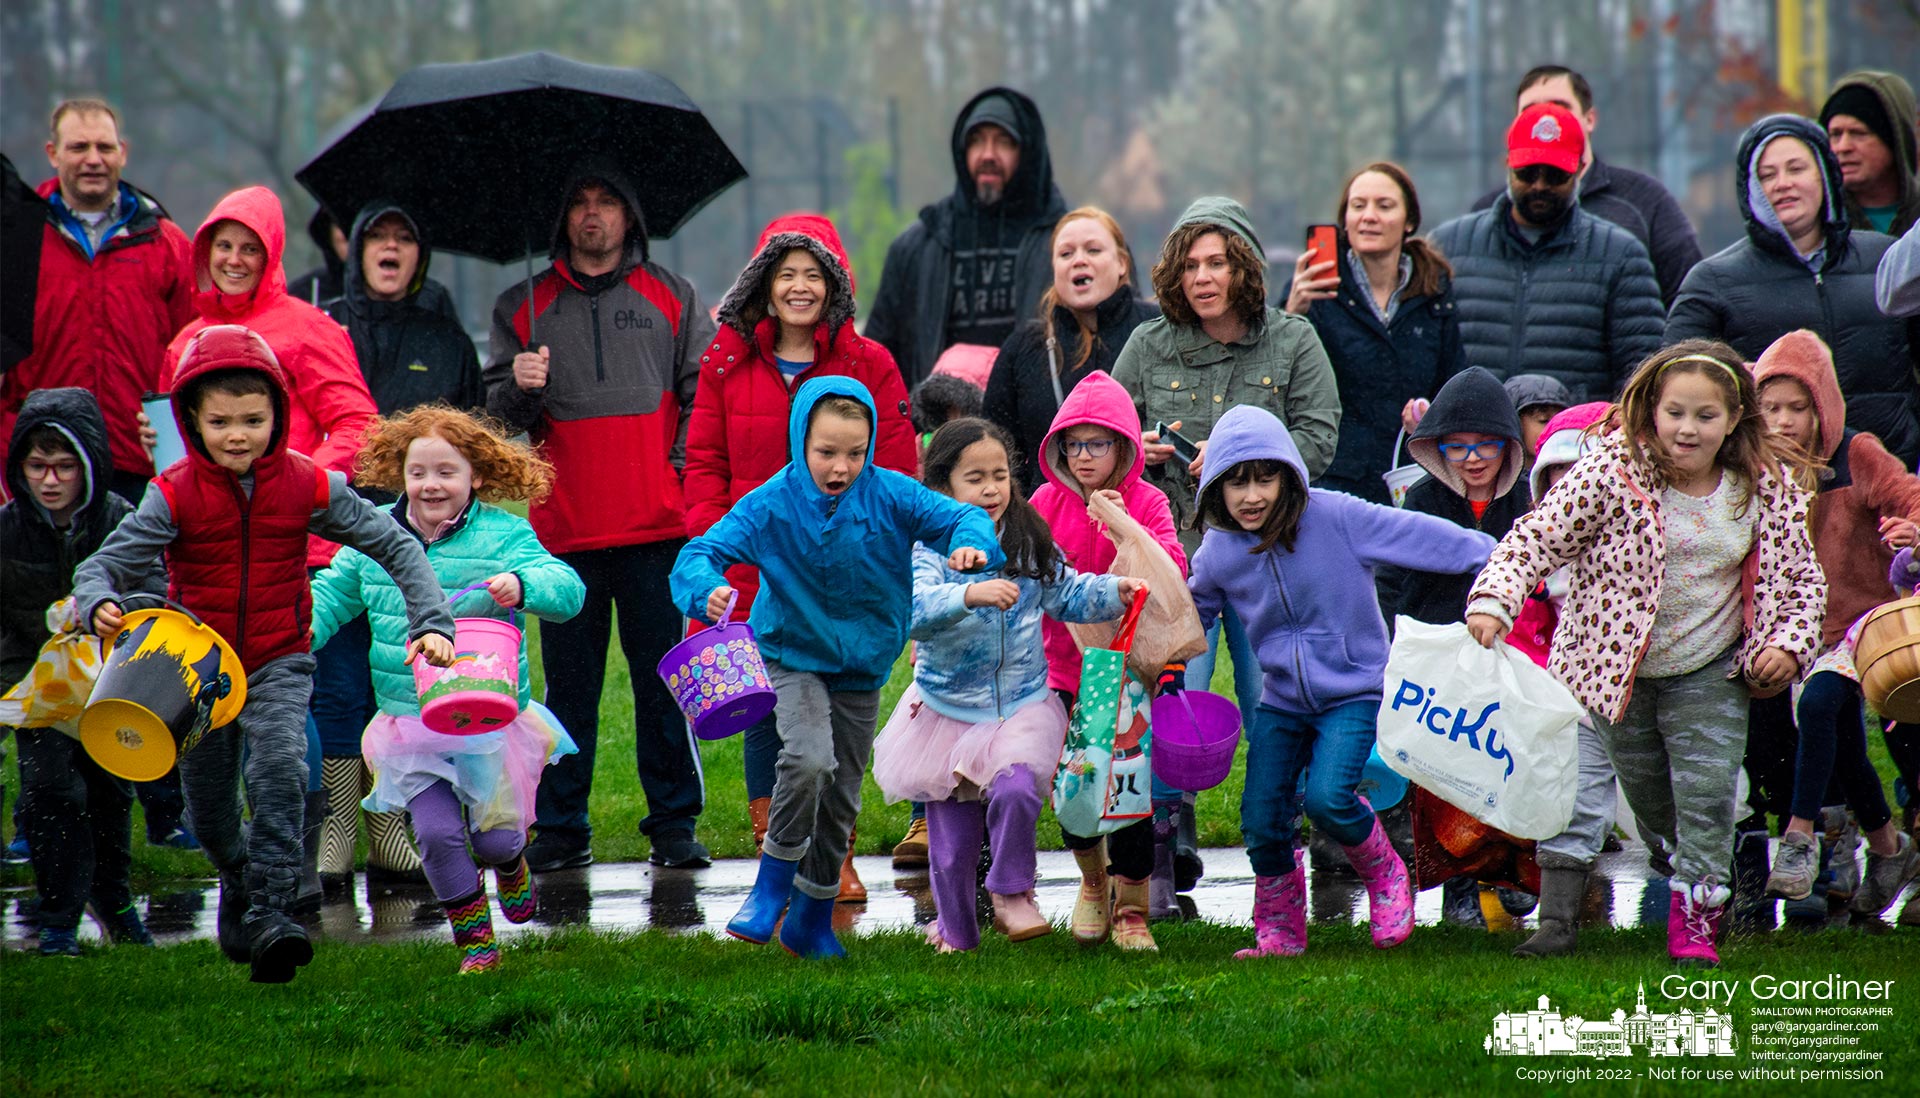 A group of youngsters cheered by their parents race toward a collection of plastic Easter eggs in one of the Eggstravaganza events at Hoof Woods Park. My Final Photo for April 16, 2022.